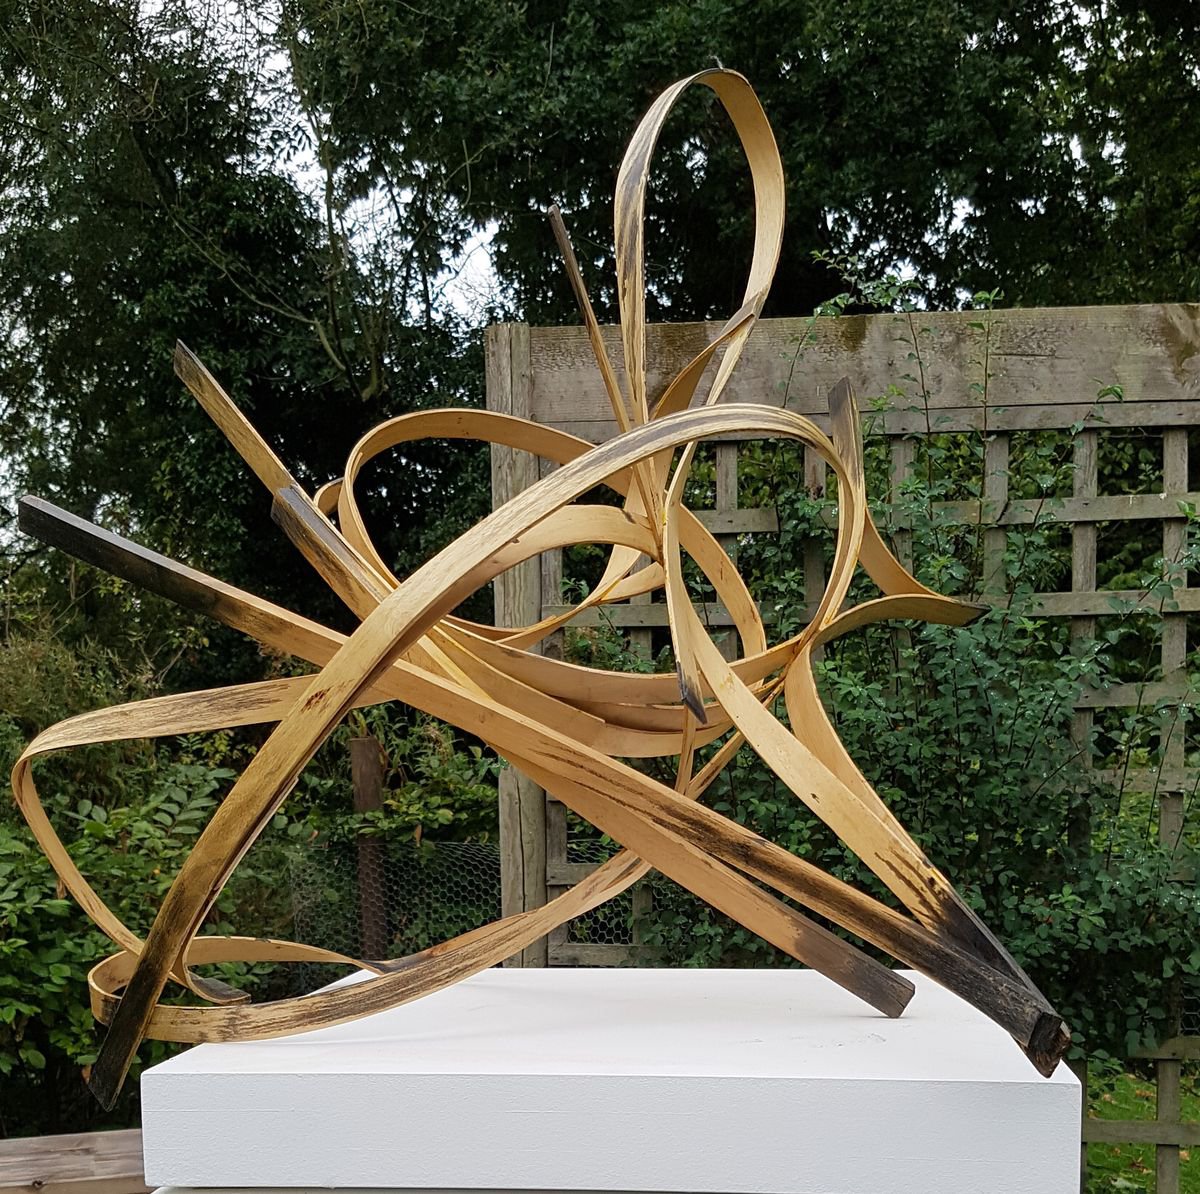 SculptureSeries3no.2 by Mark Purllant